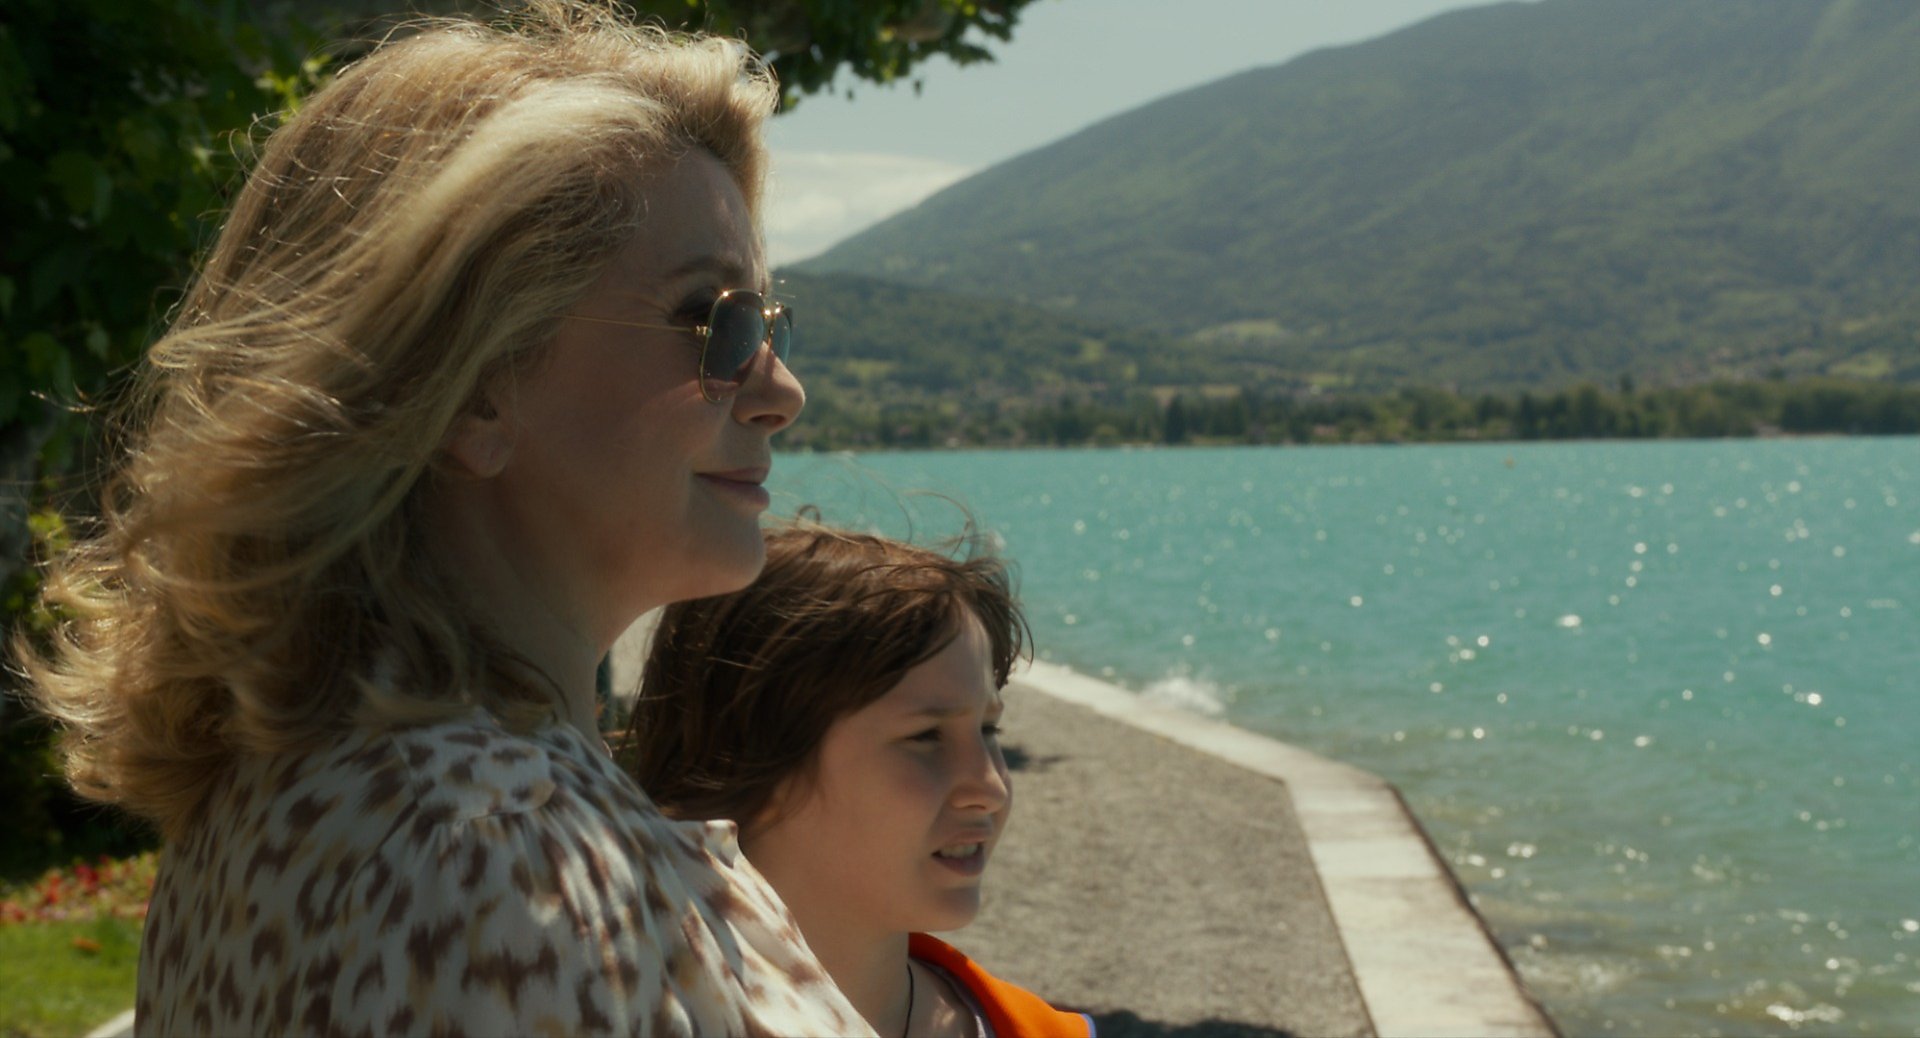 On My Way Review Deneuve Film Open Thought Provoking